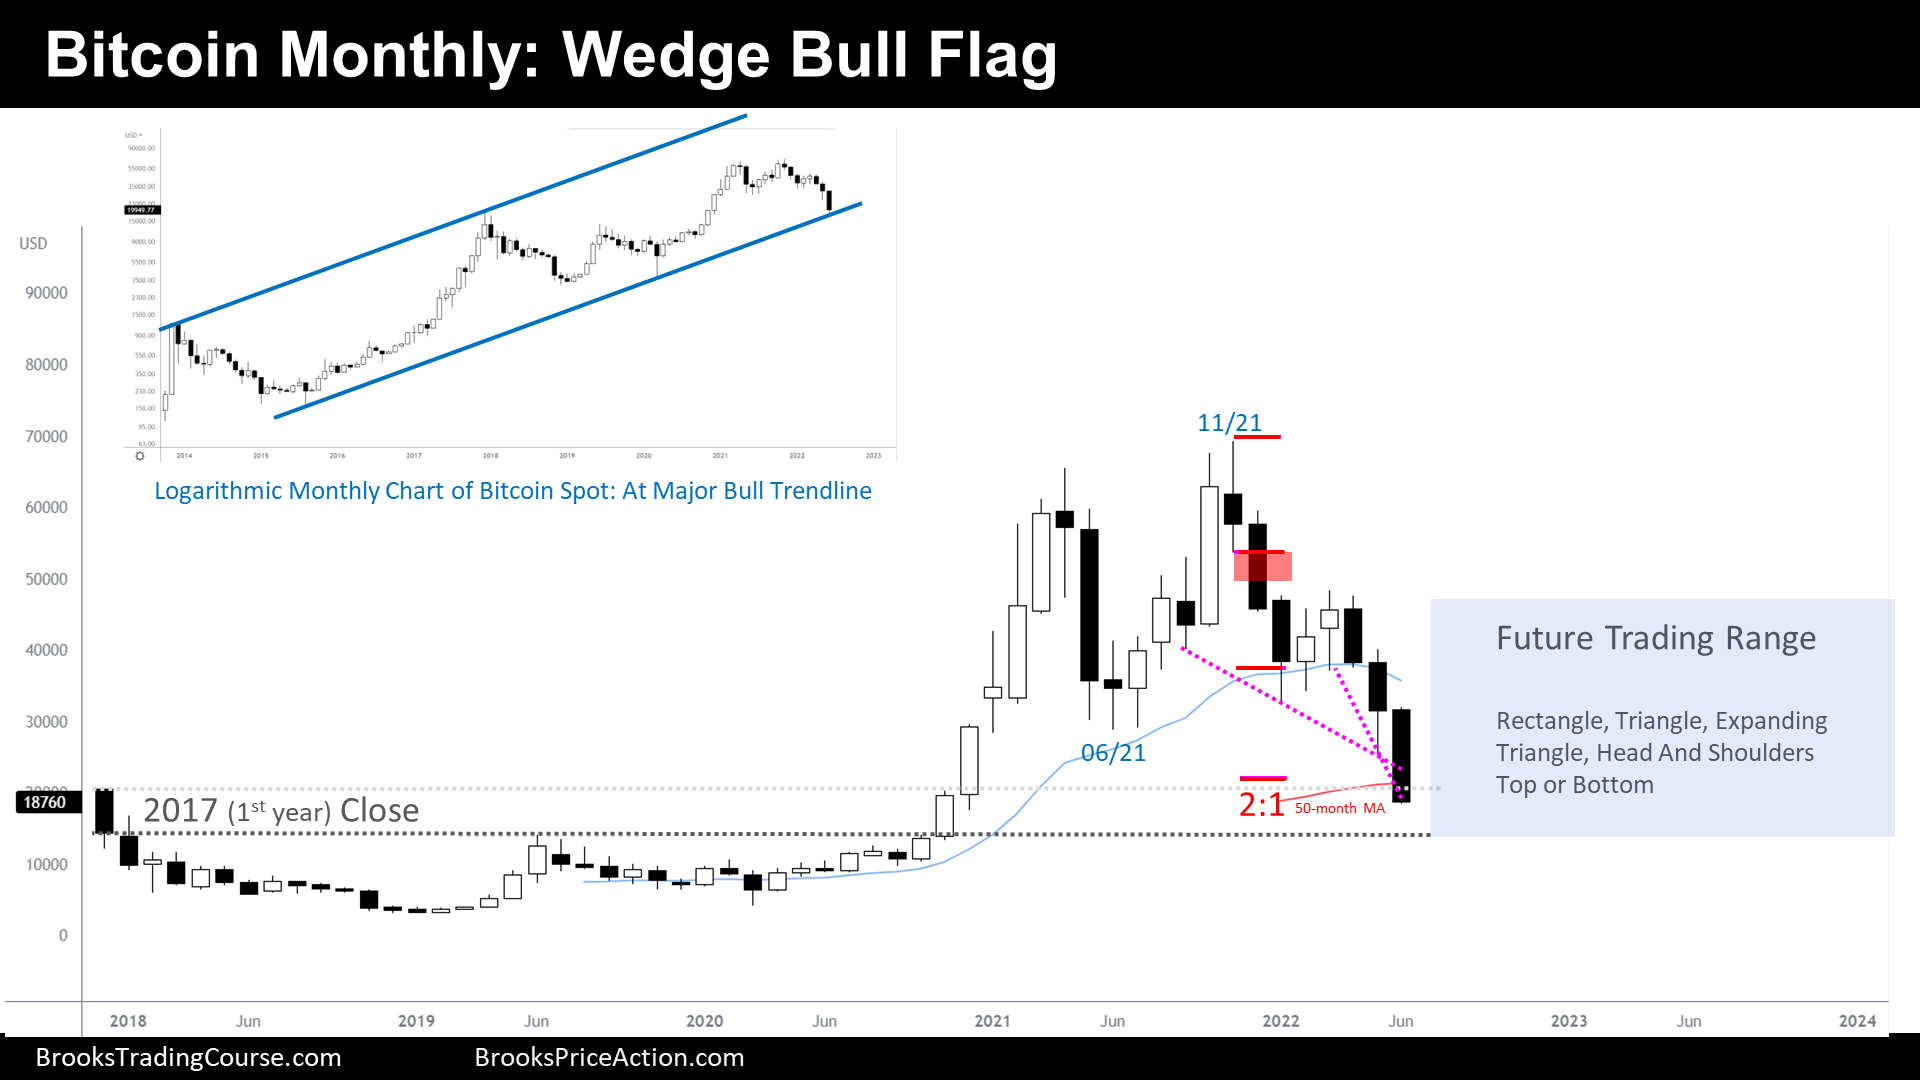 Bitcoin Monthly Chart Wedge Bull Flag